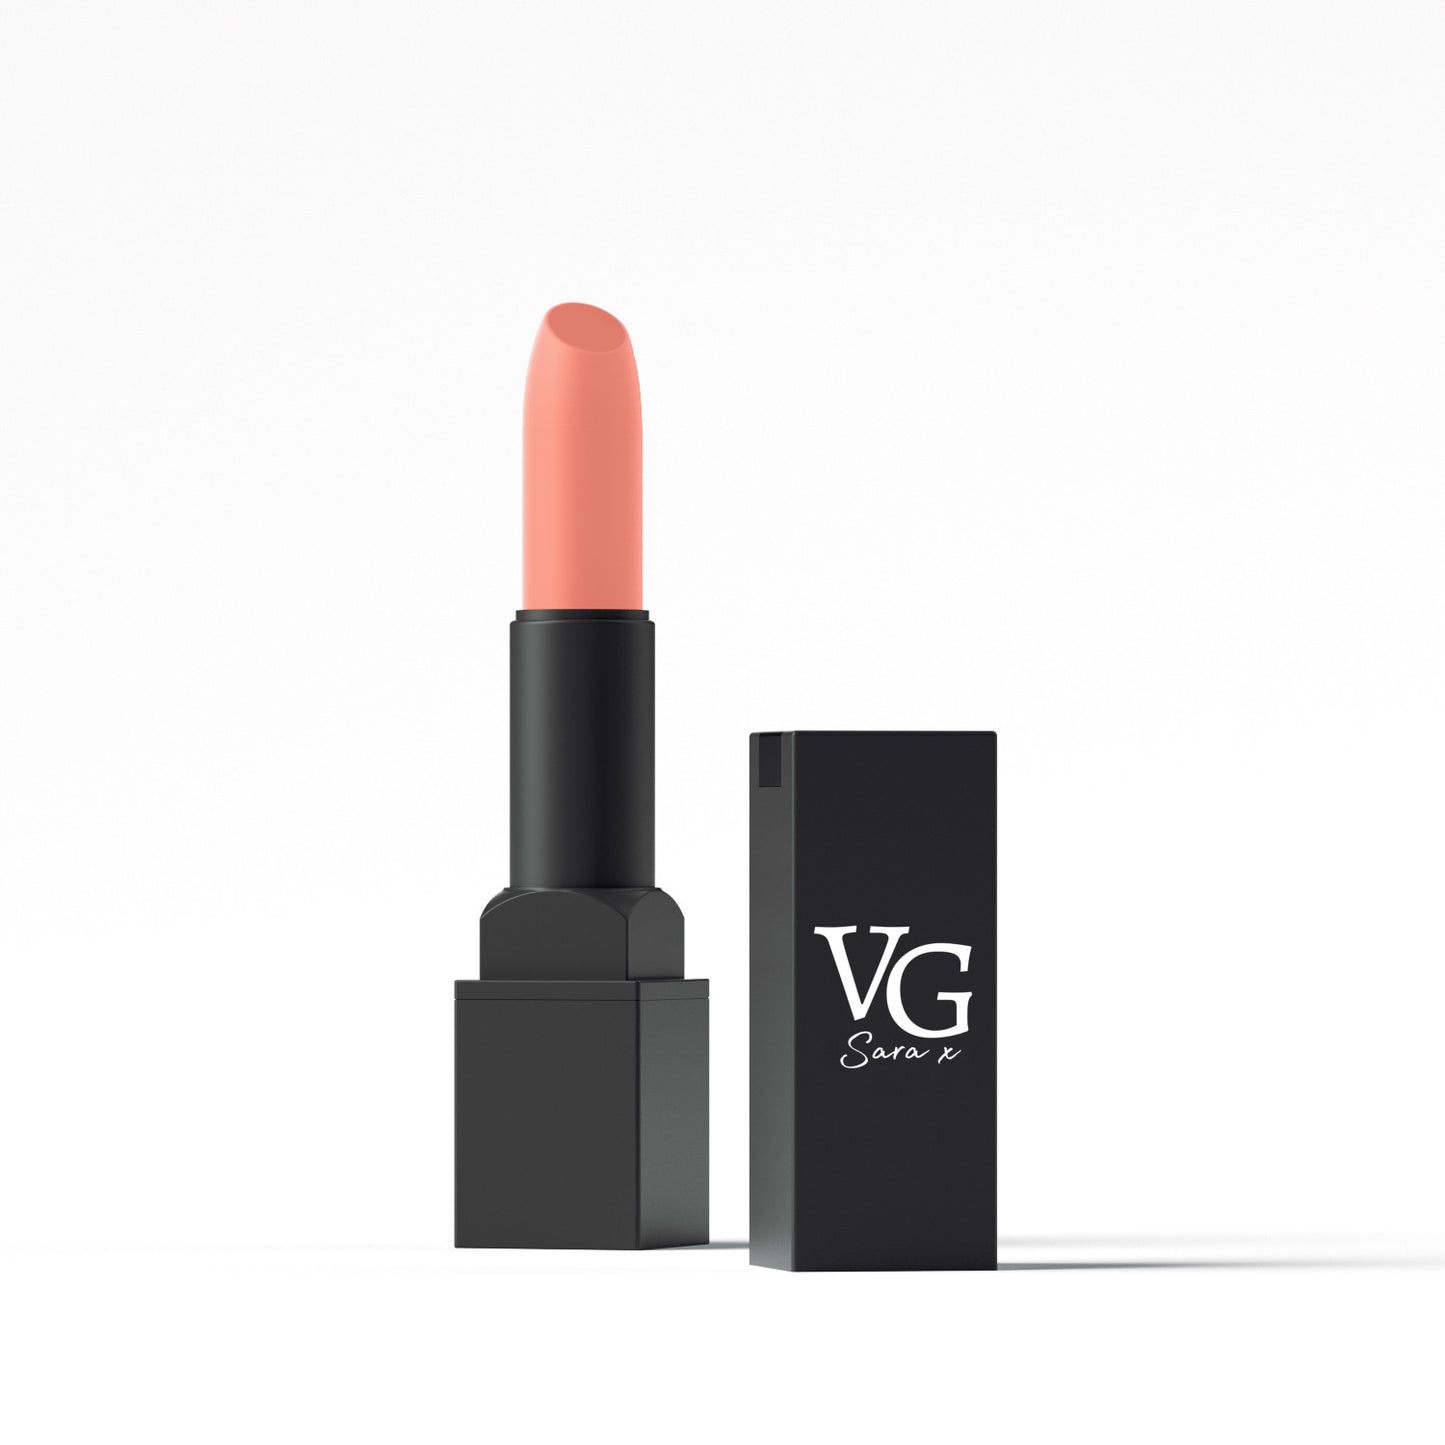 Detailed view of VG Cosmetics last lasting lipstick with brand imprint